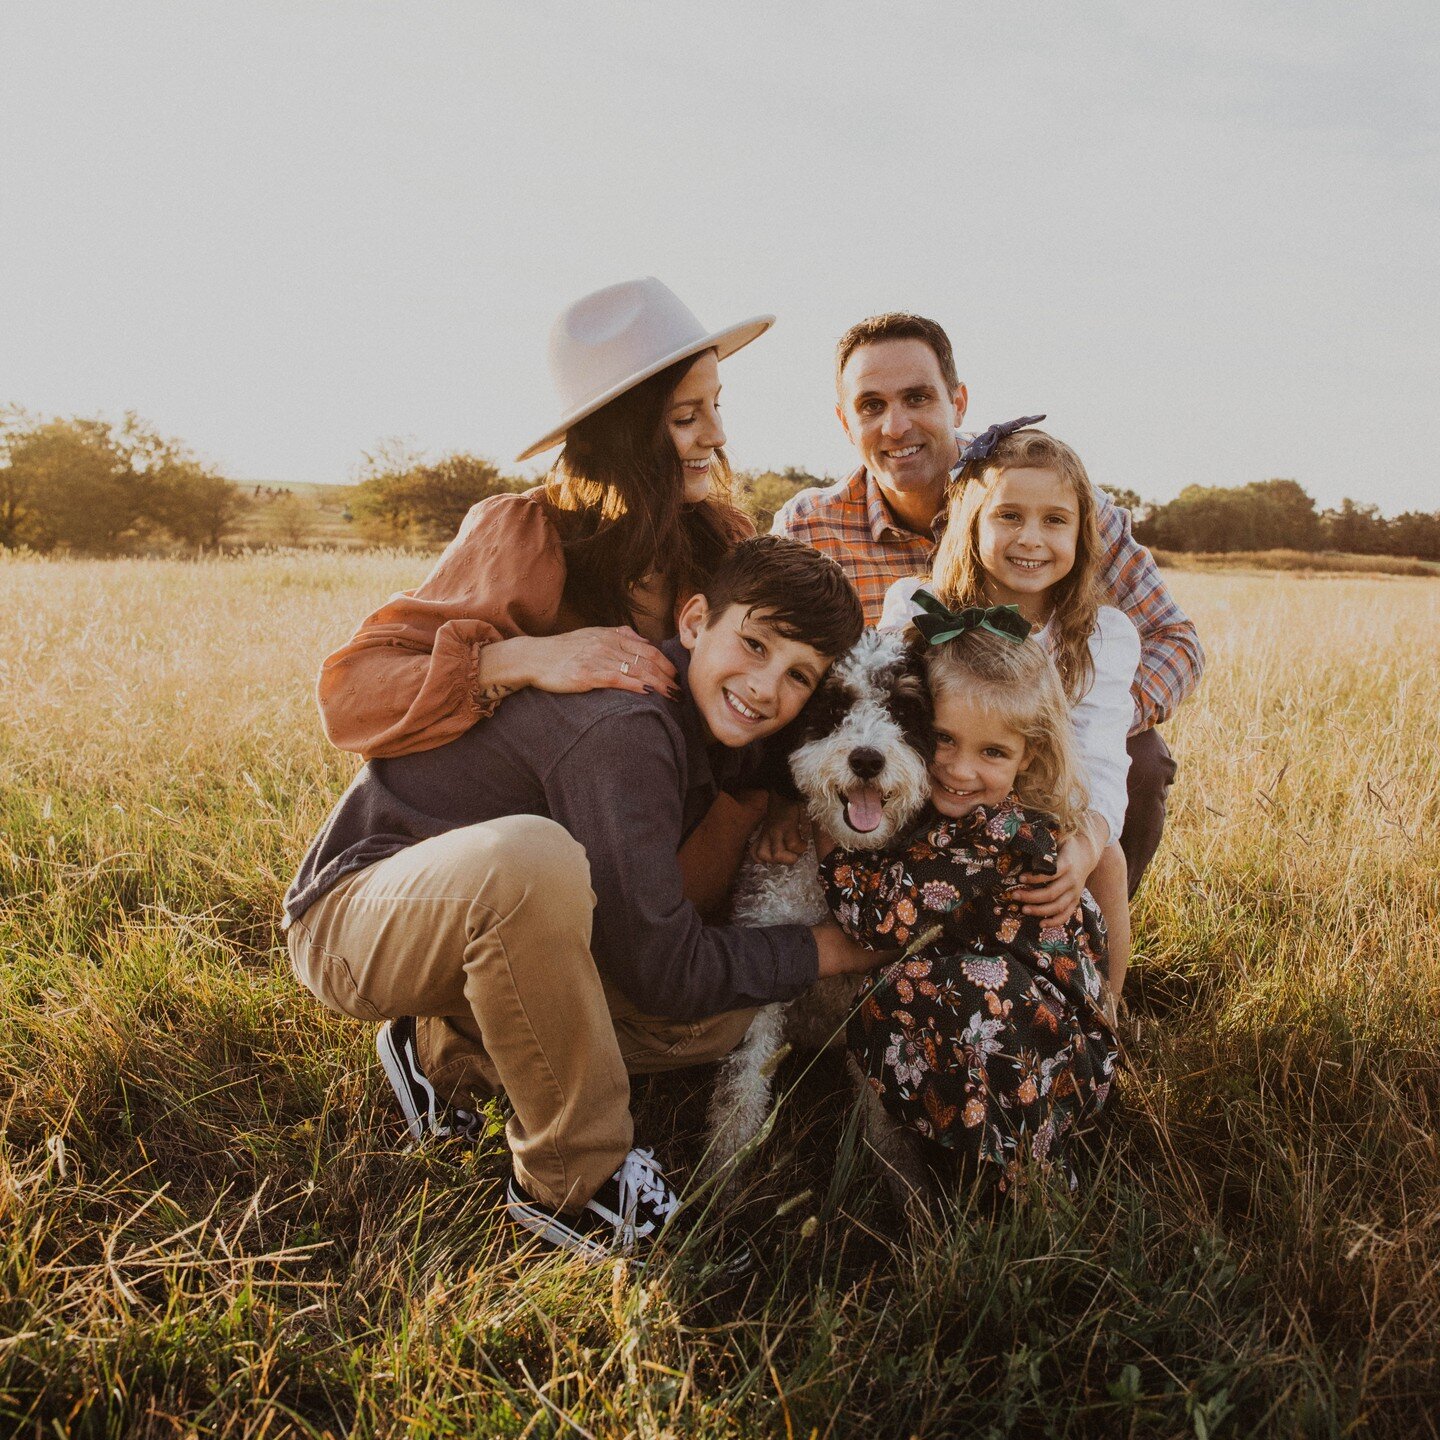 One of the most common questions I get prior to a photoshoot is, &quot;what should we wear?&quot; One of the best and easiest ways to get your family photo ready is focus on coordinating rather than matching. For example, instead of having everyone w